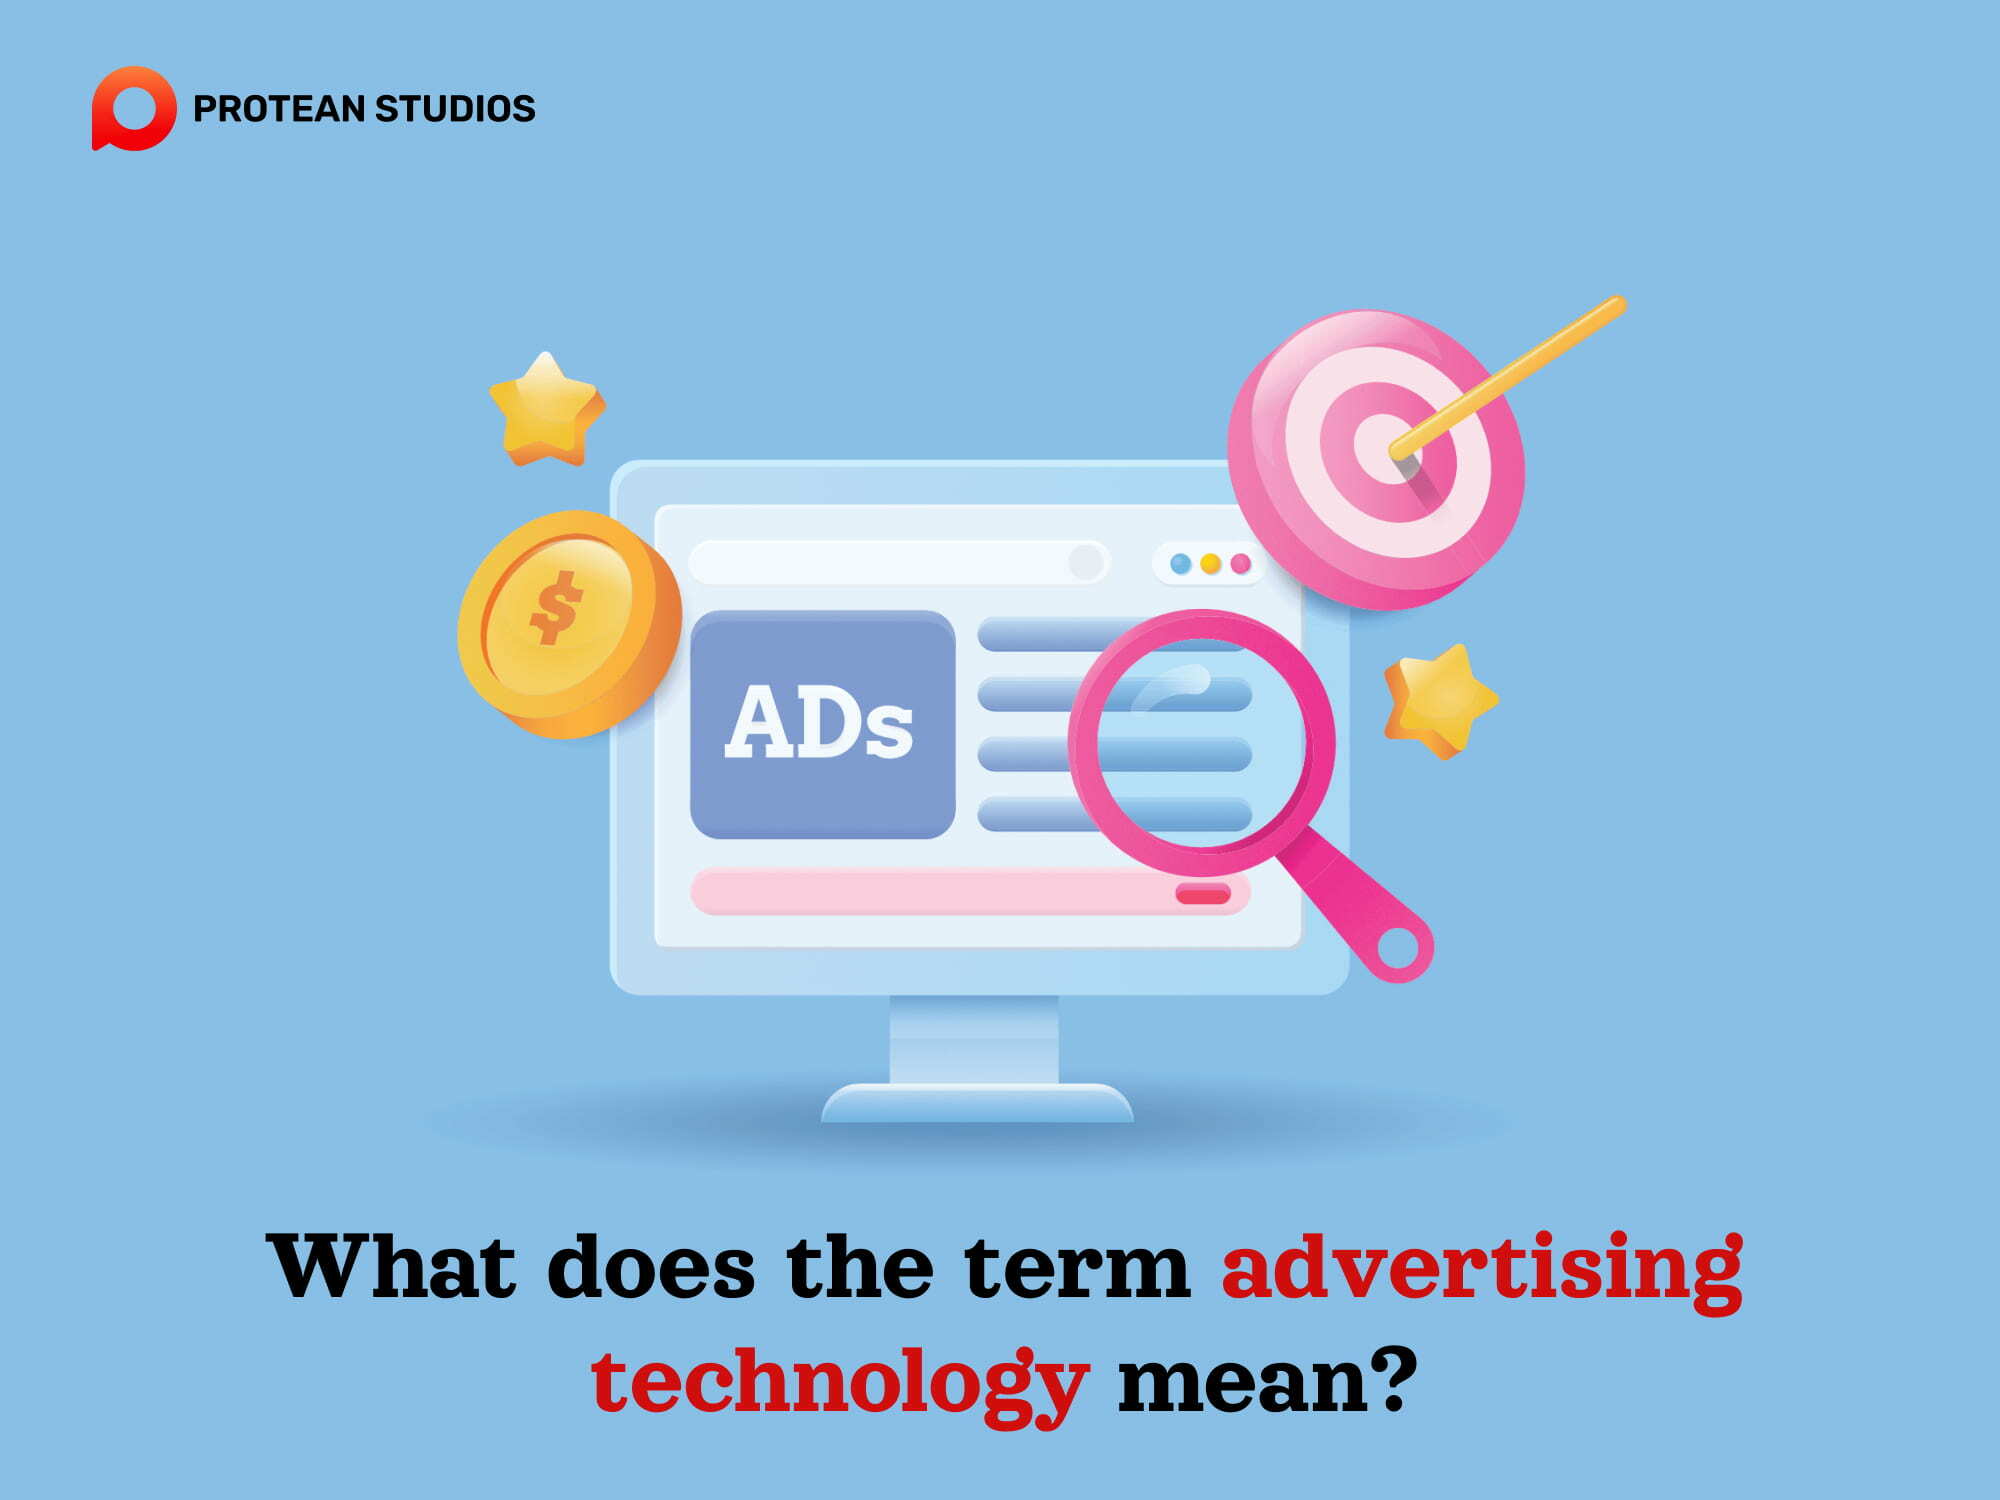 Definition of ad technology